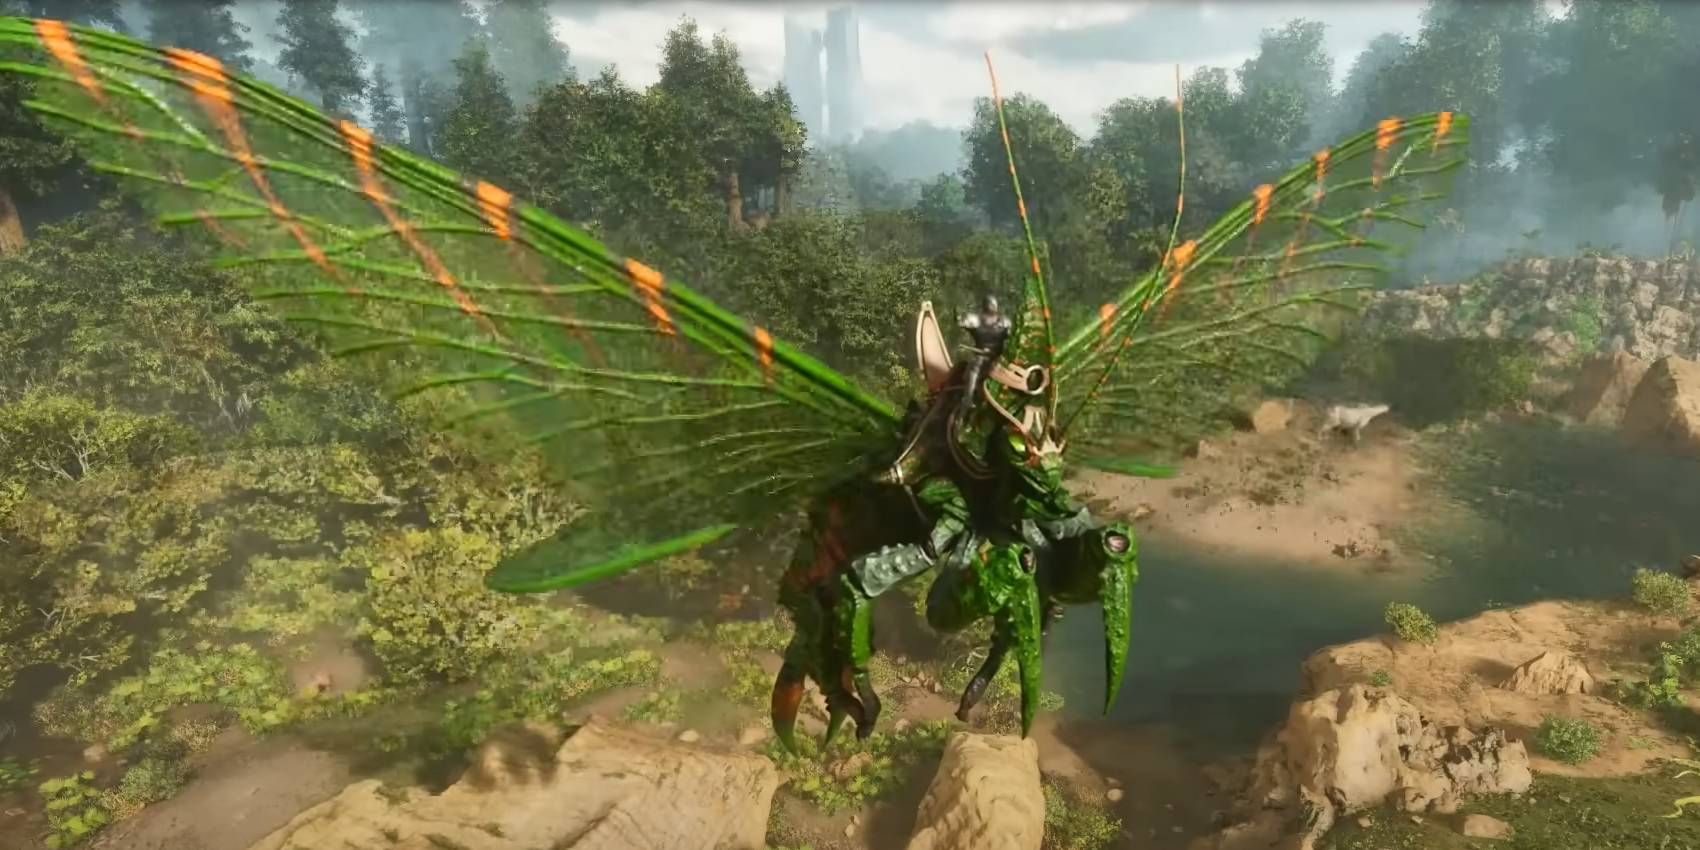 ARK: Survival Ascended Rhyniognatha flying insect creature tamed as a mount for land, air, and sea travel